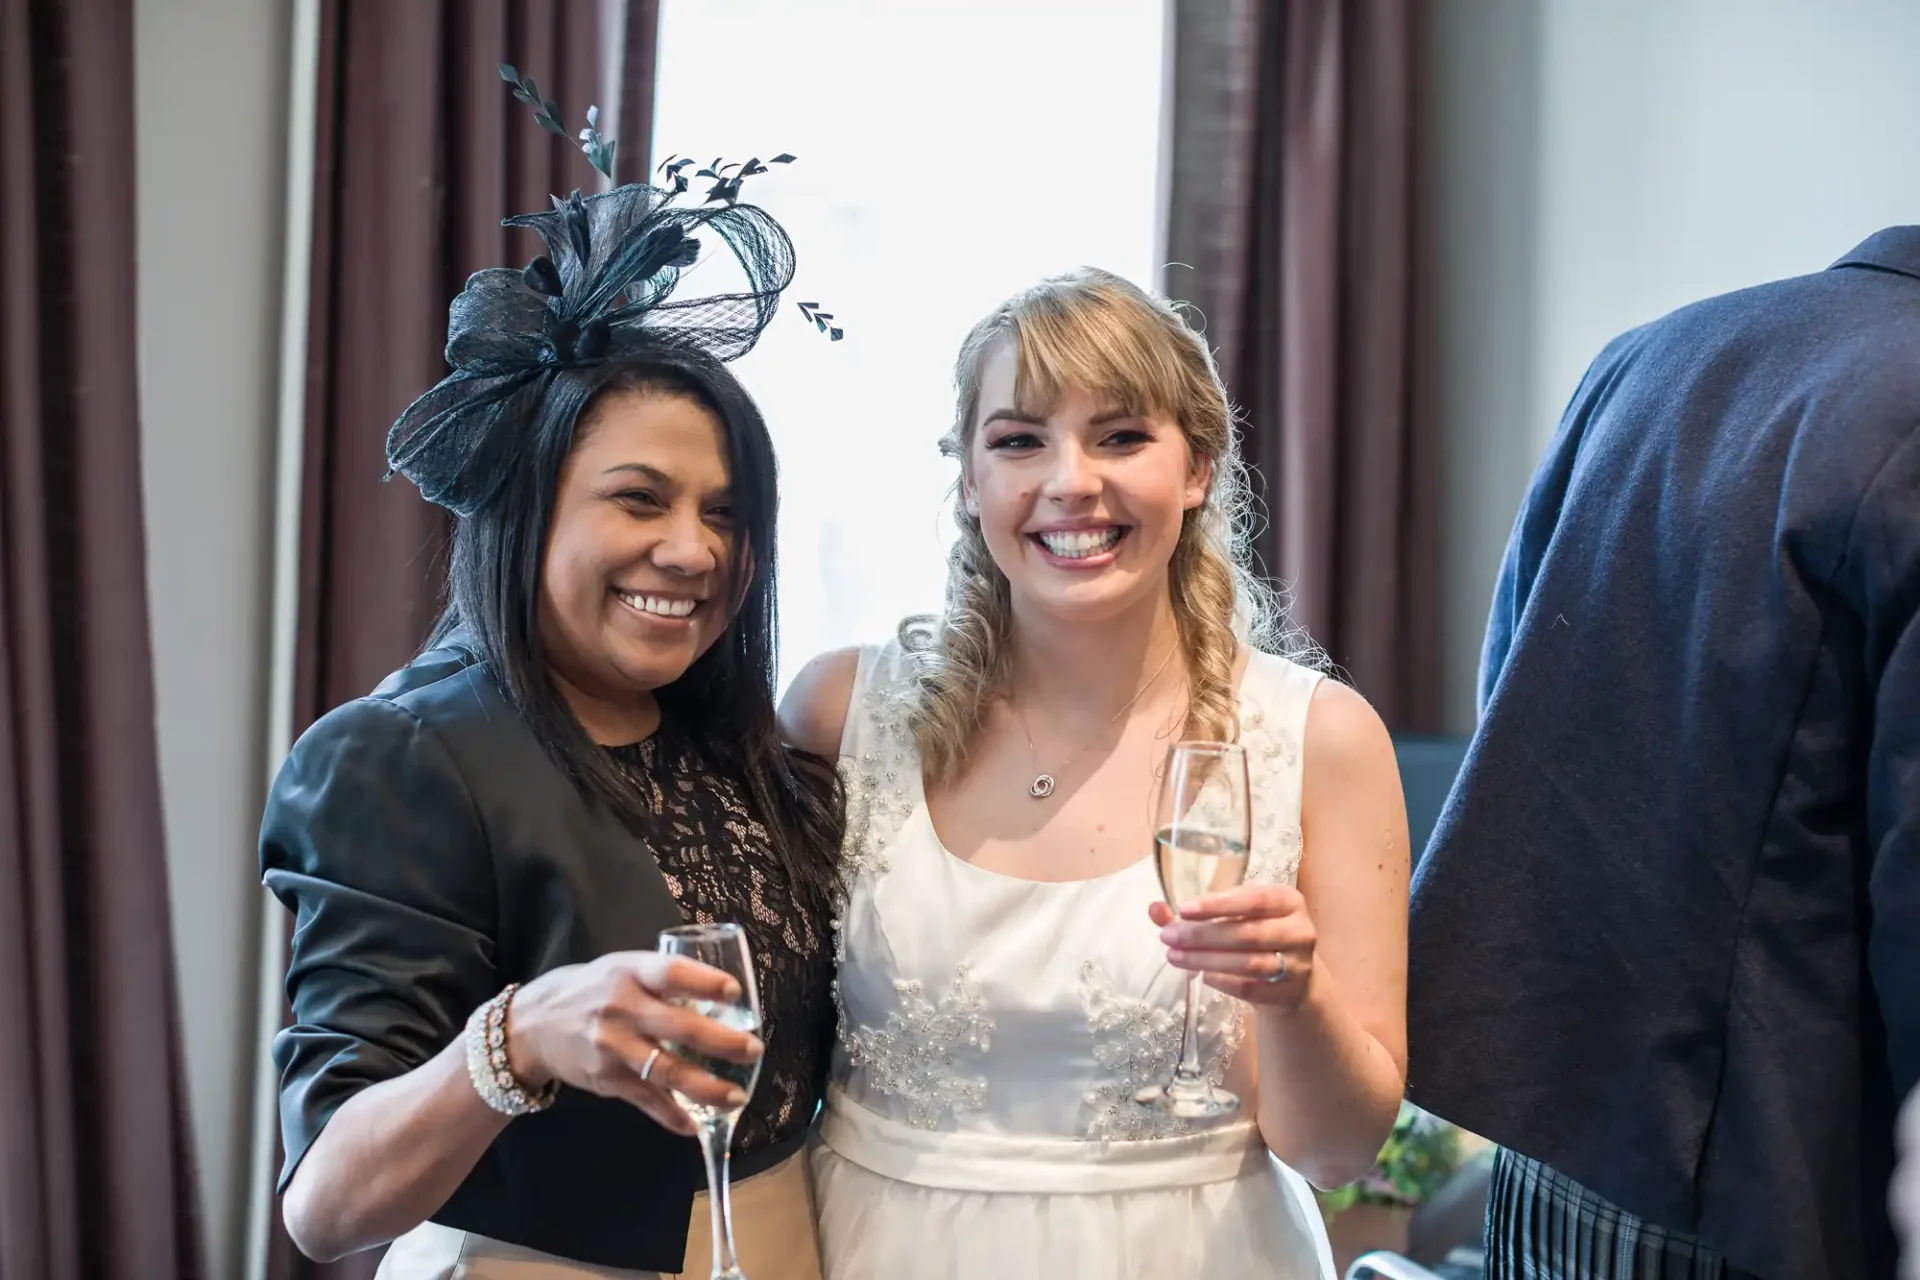 Two women smiling and toasting with champagne glasses at a celebration, one in a black outfit with a hat and the other in a white bridal dress.